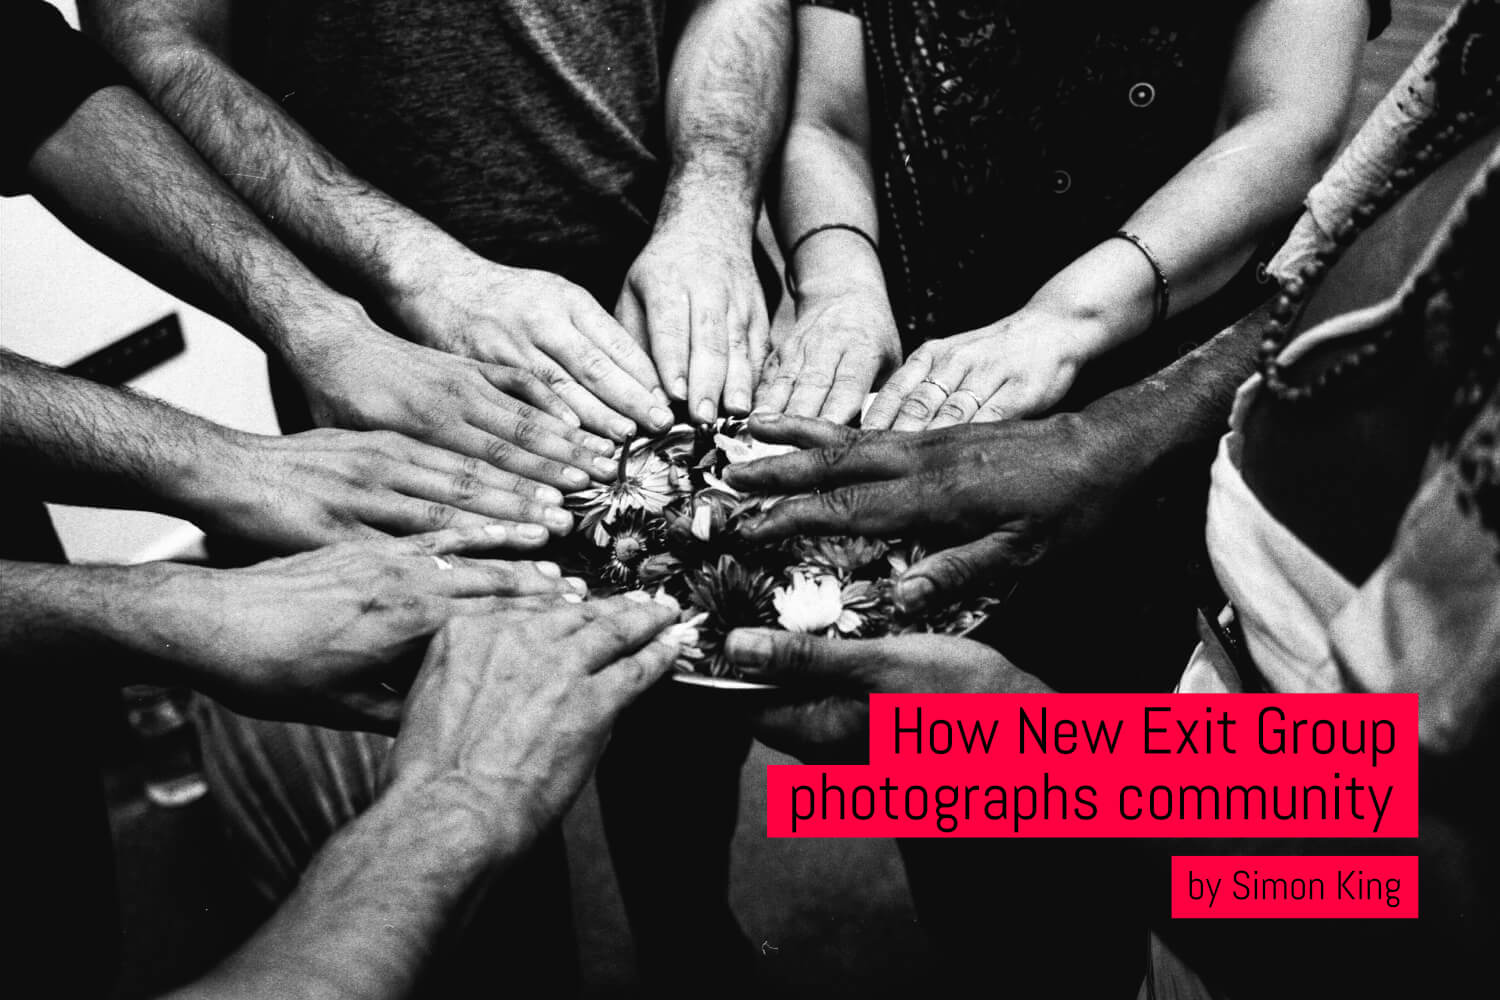 How New Exit Group photographs community